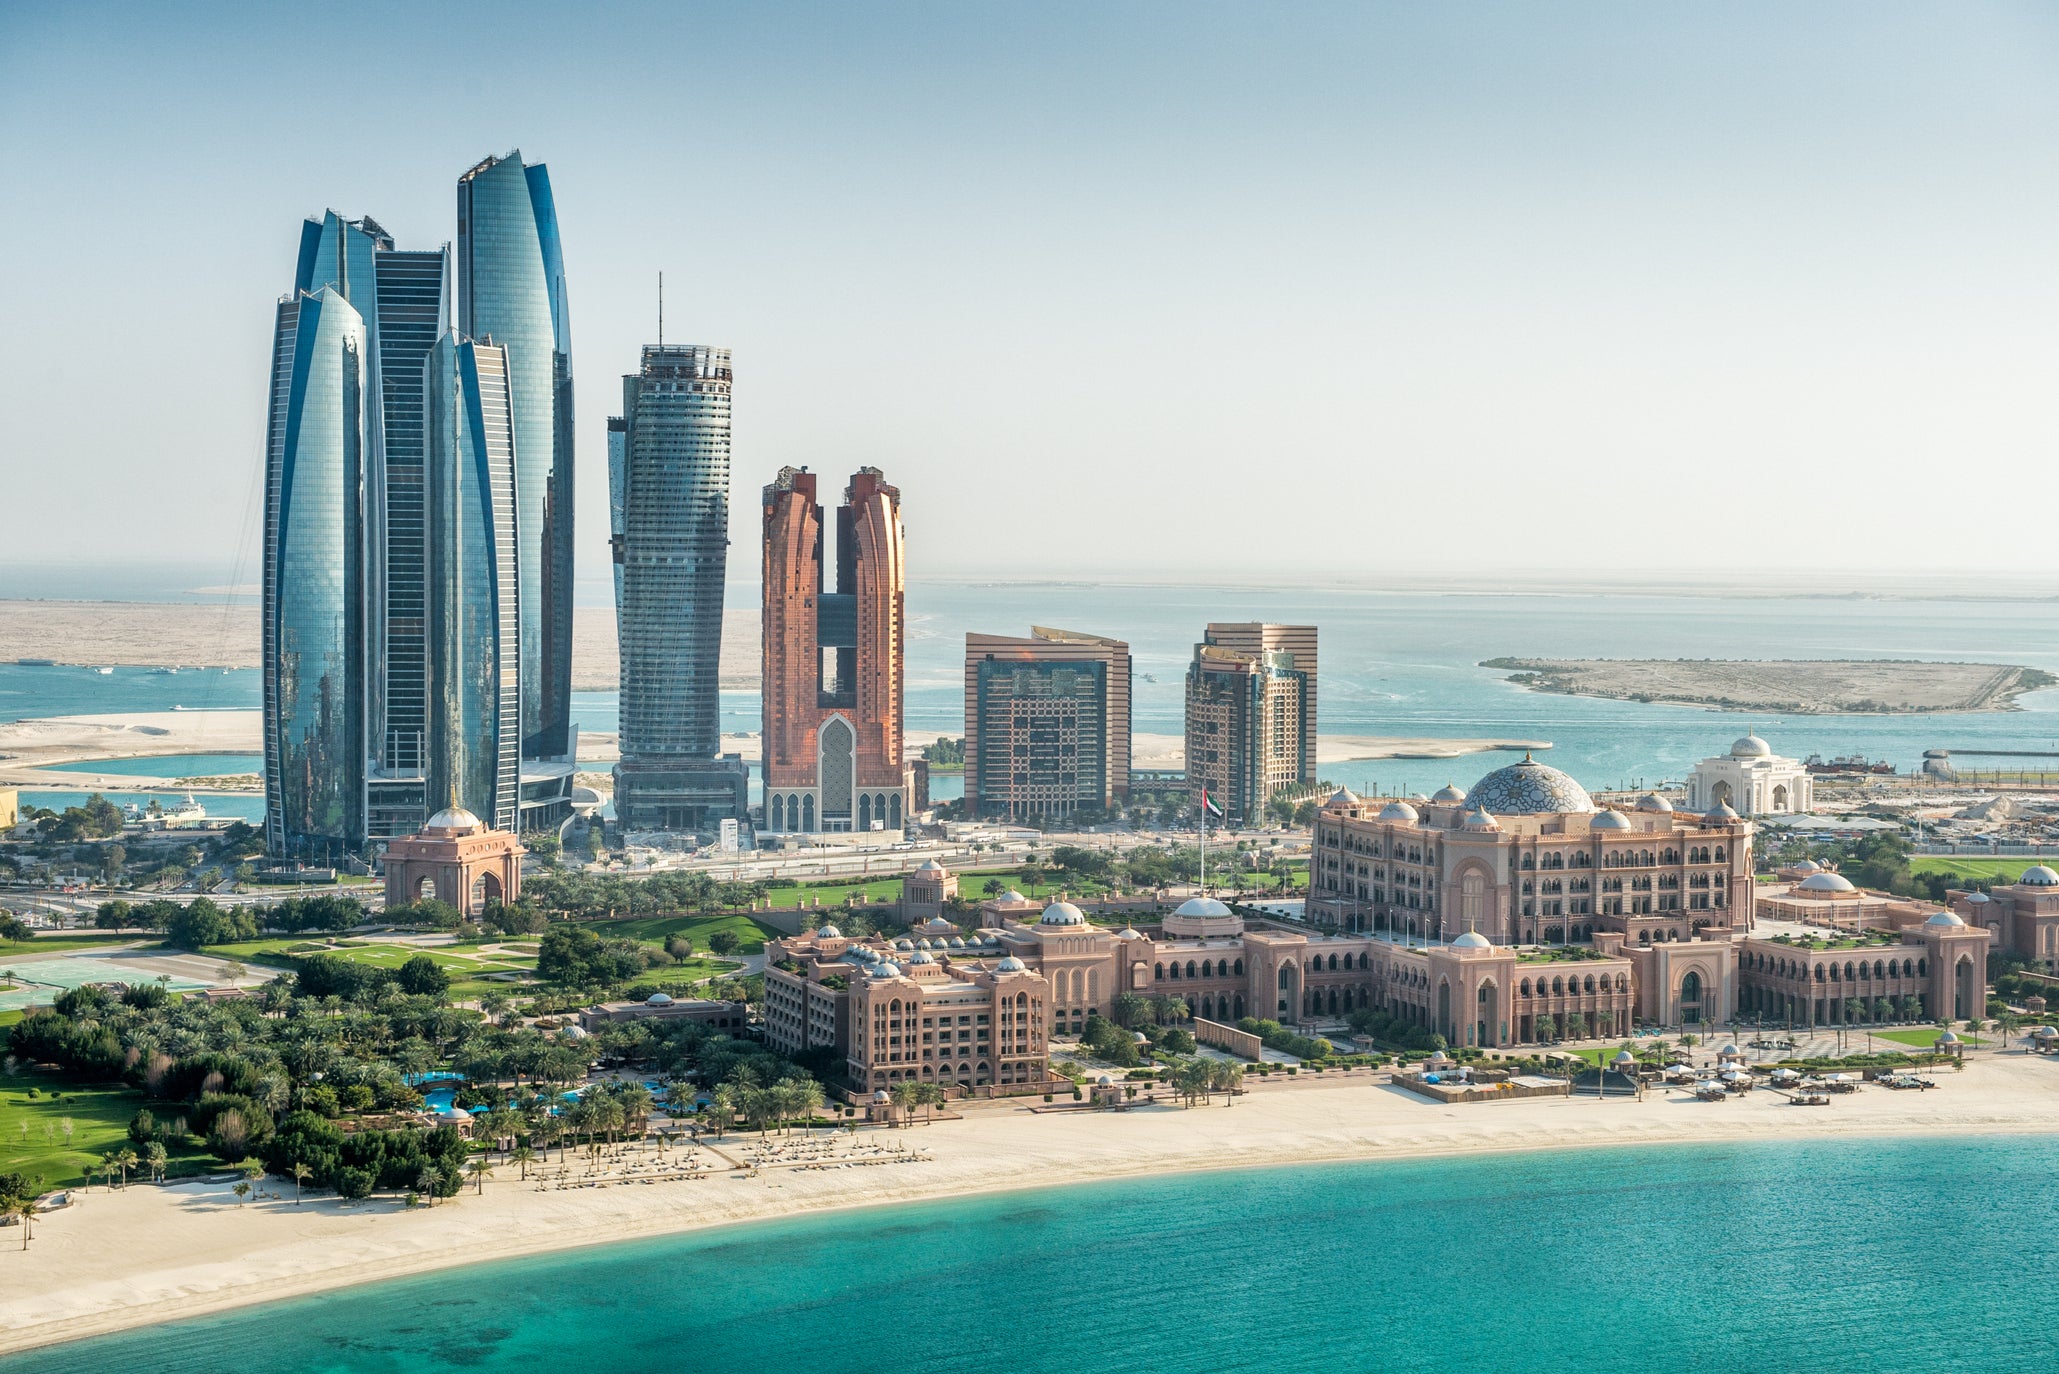 Top 10 Places to Visit in UAE - Abu Dhabi: The Capital's Riches